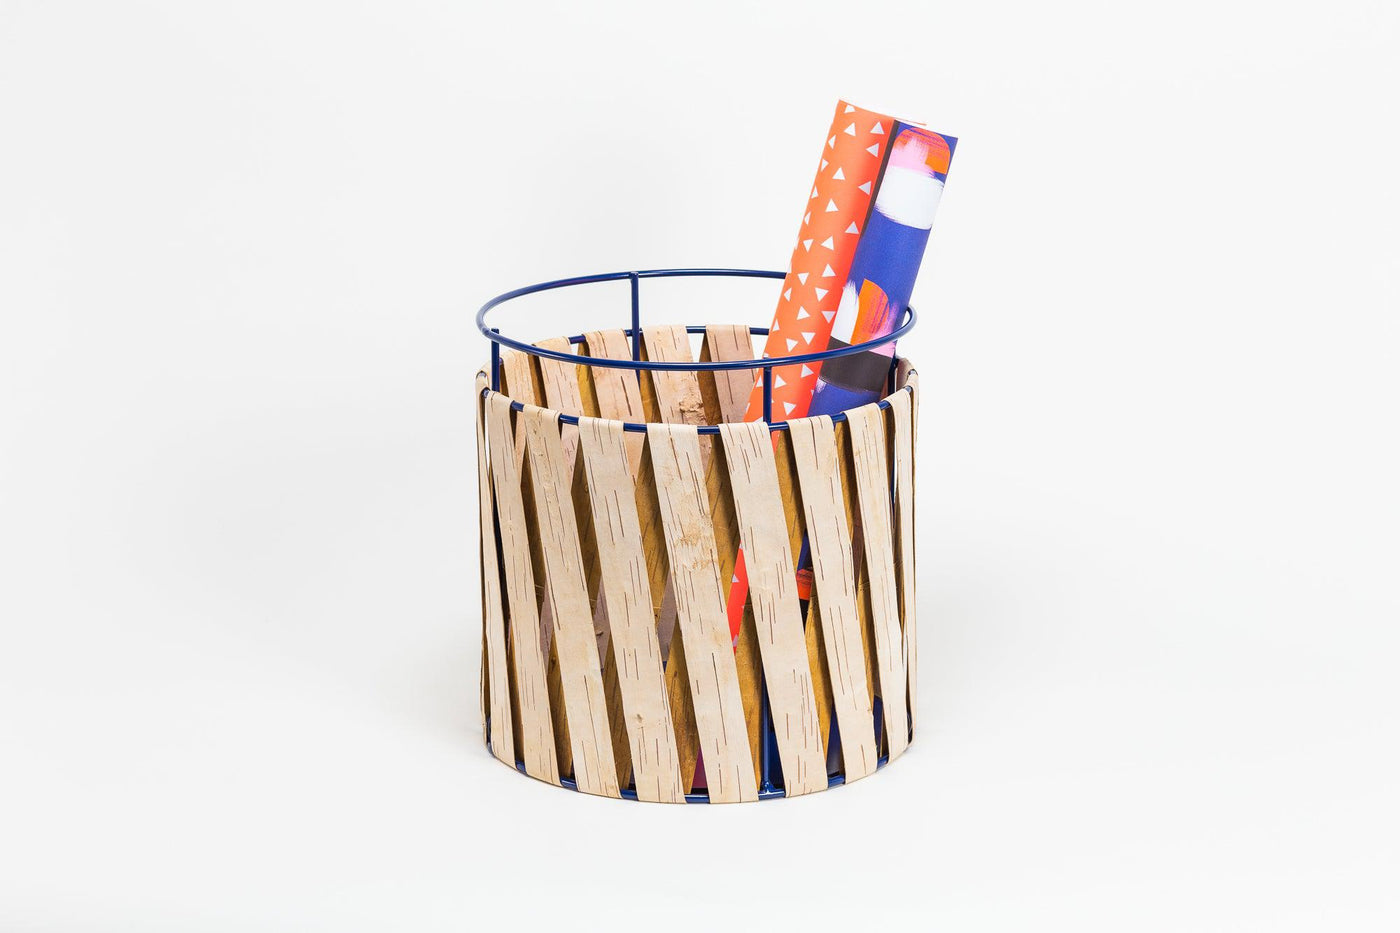 Korob Karp Birch Bark Basket-Storing and Organising-BIRCH BARK, BOXES / ORGANISERS / CONTAINERS-Forest Homes-Nature inspired decor-Nature decor